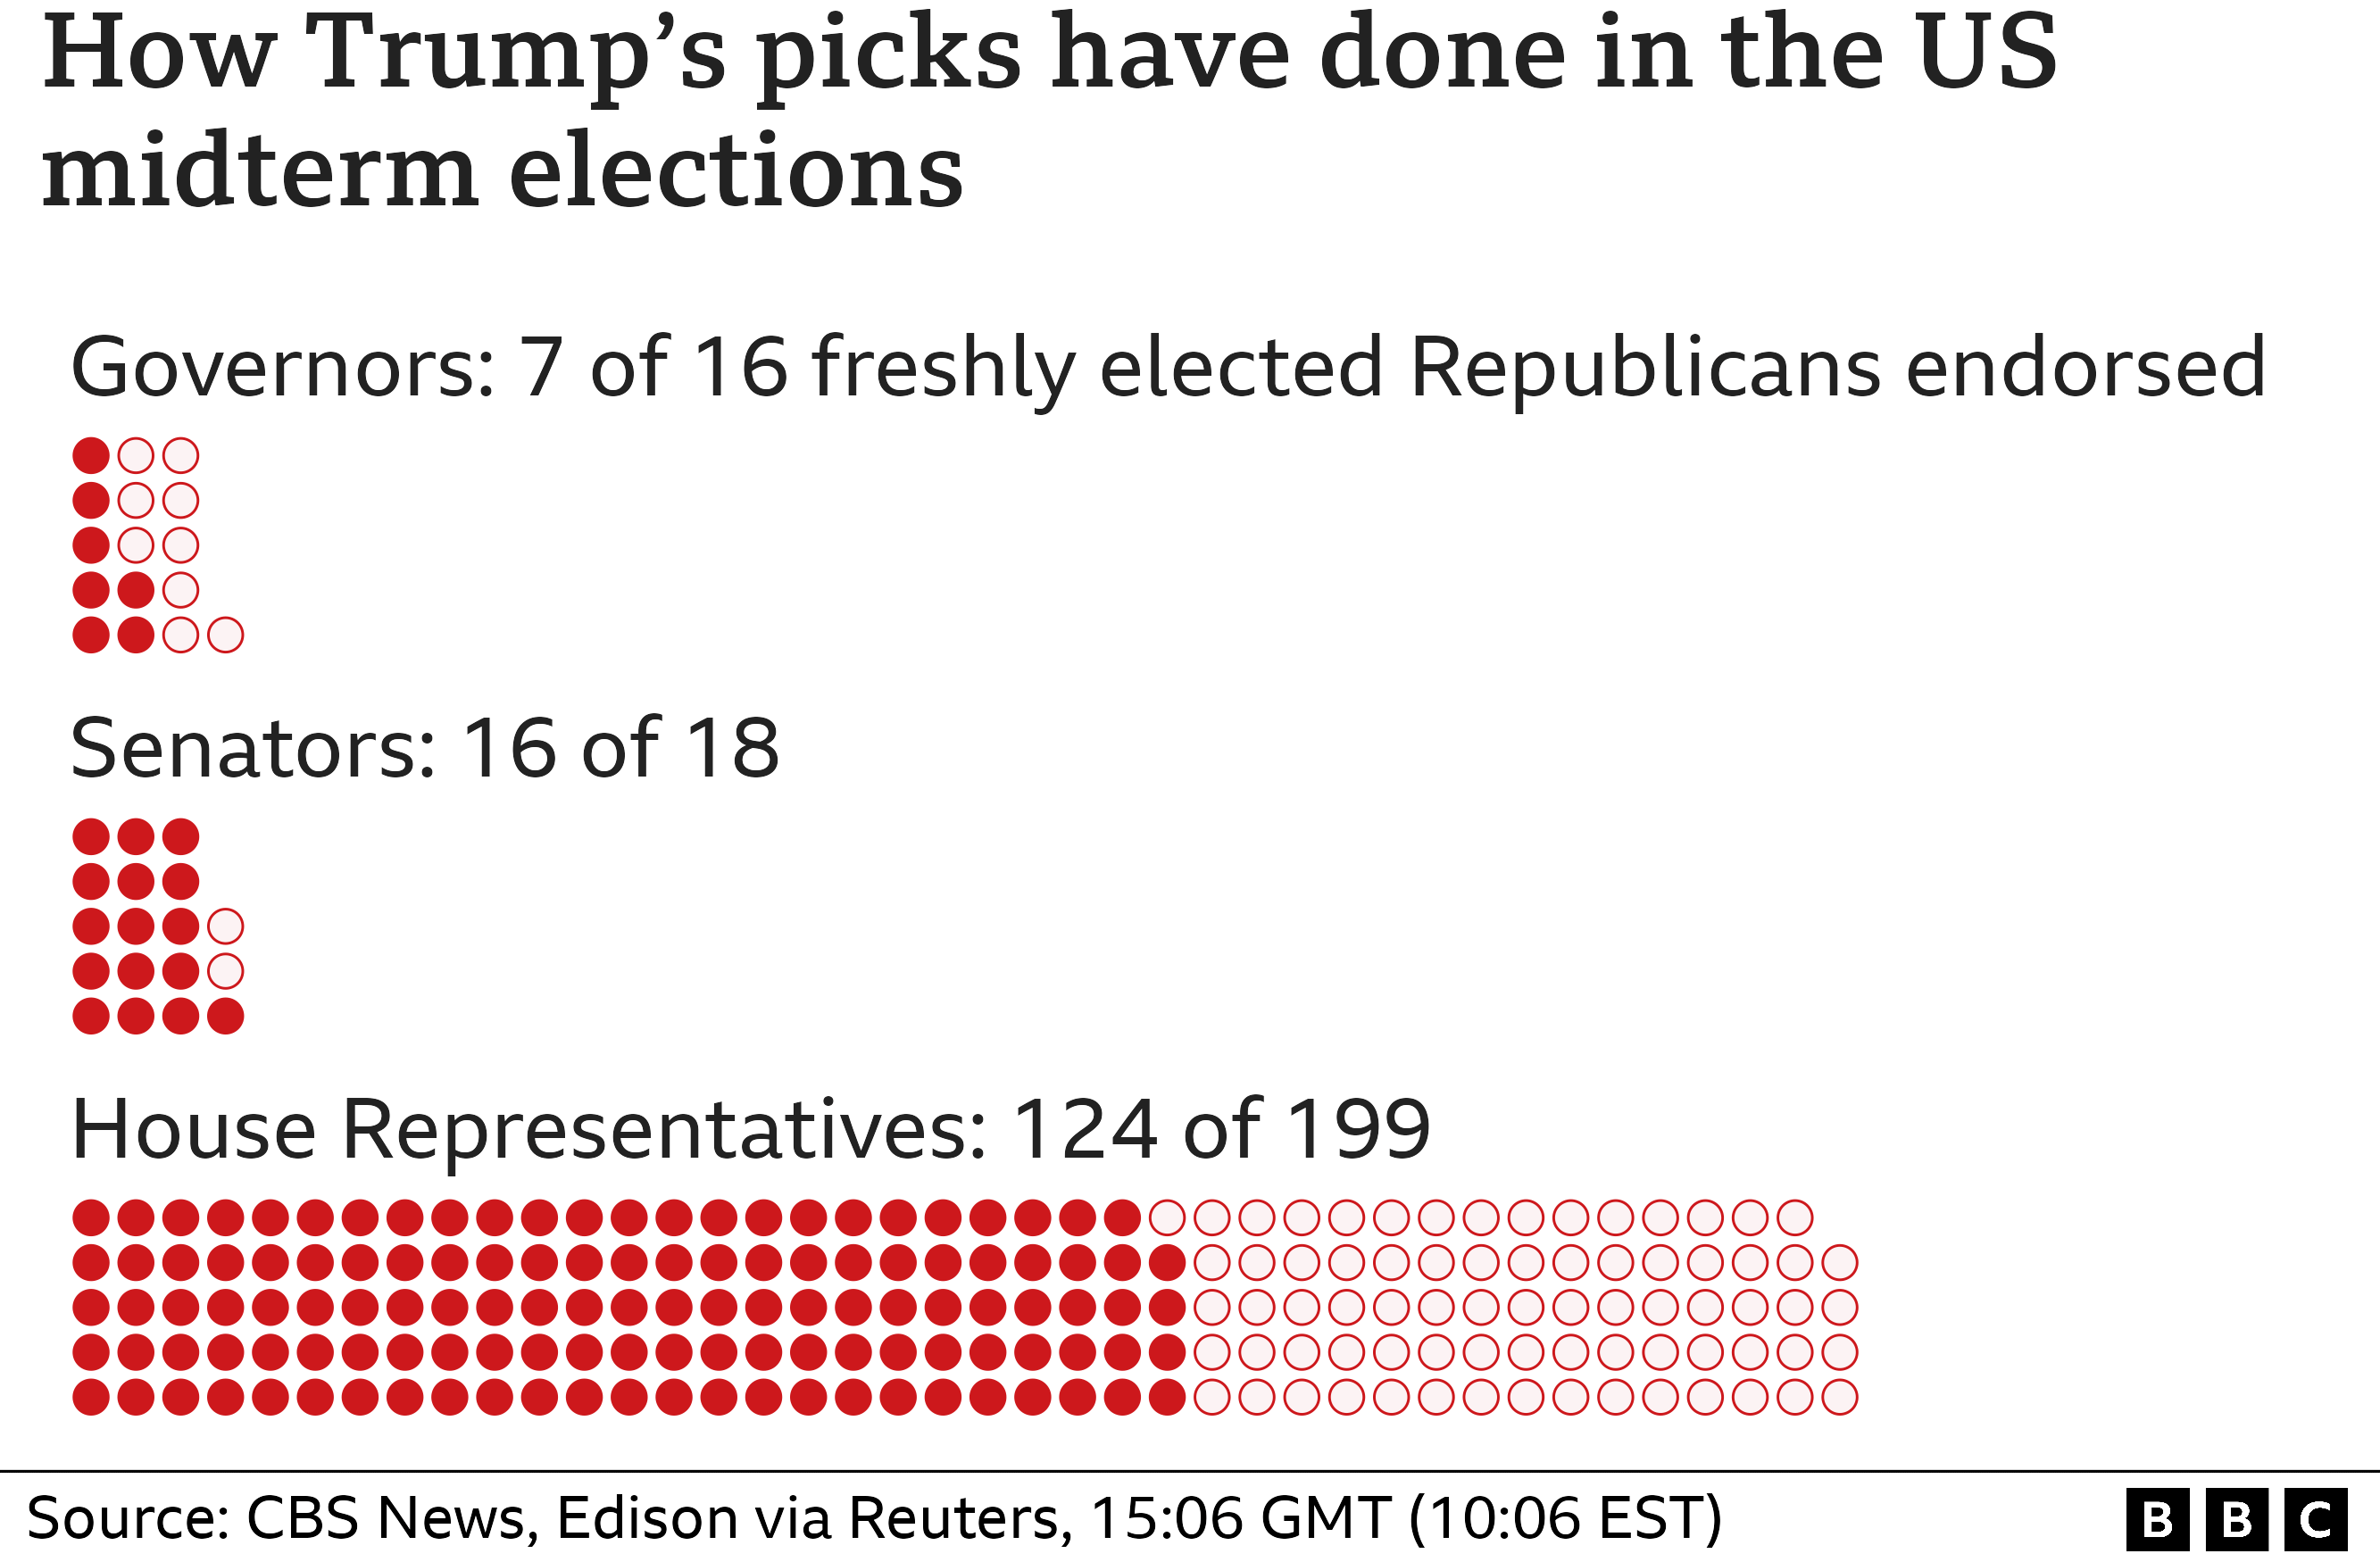 How Trump's picks did in midterms